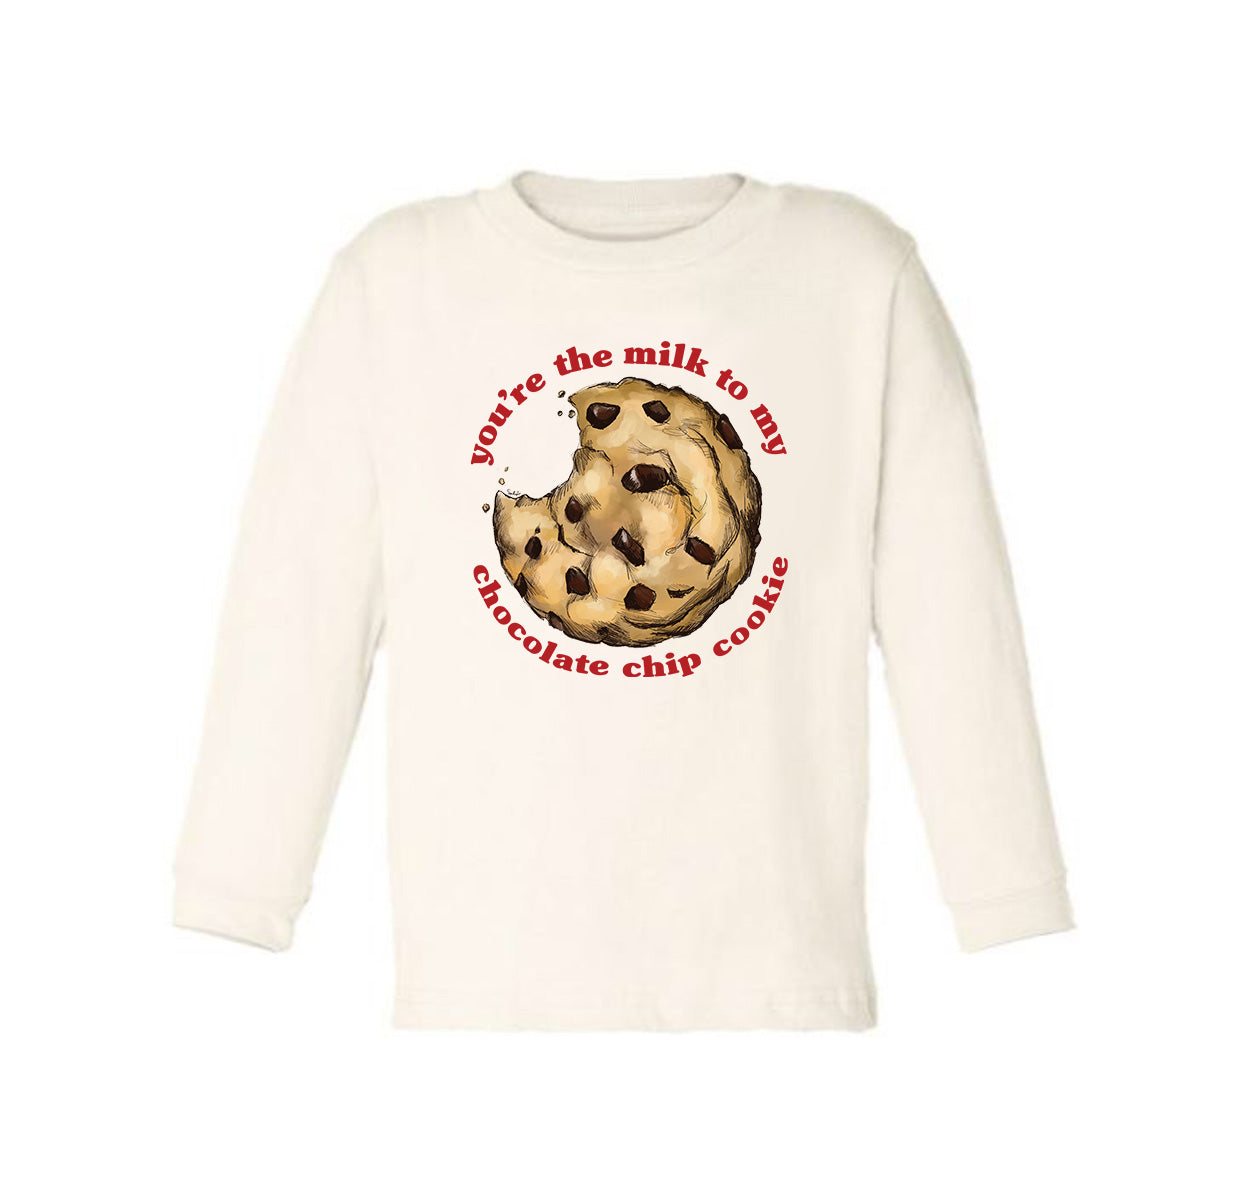 You're the Milk to my Chocolate Chip Cookie [Long Sleeved Toddler Tee]